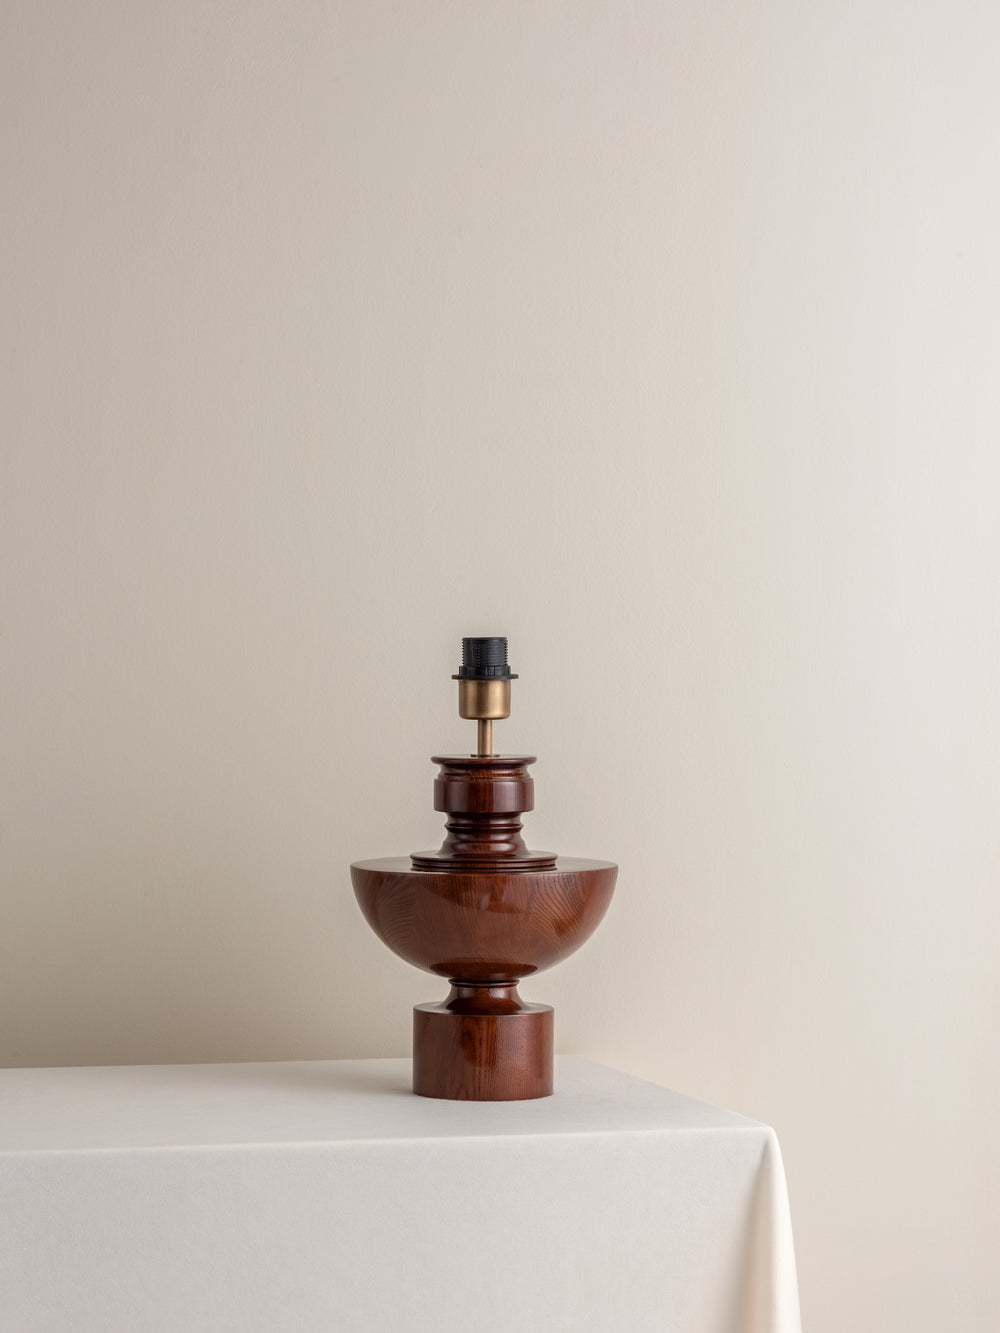 Editions spun wood lamp with + aged brass shade | Table Lamp | Lights & Lamps | UK | Modern Affordable Designer Lighting